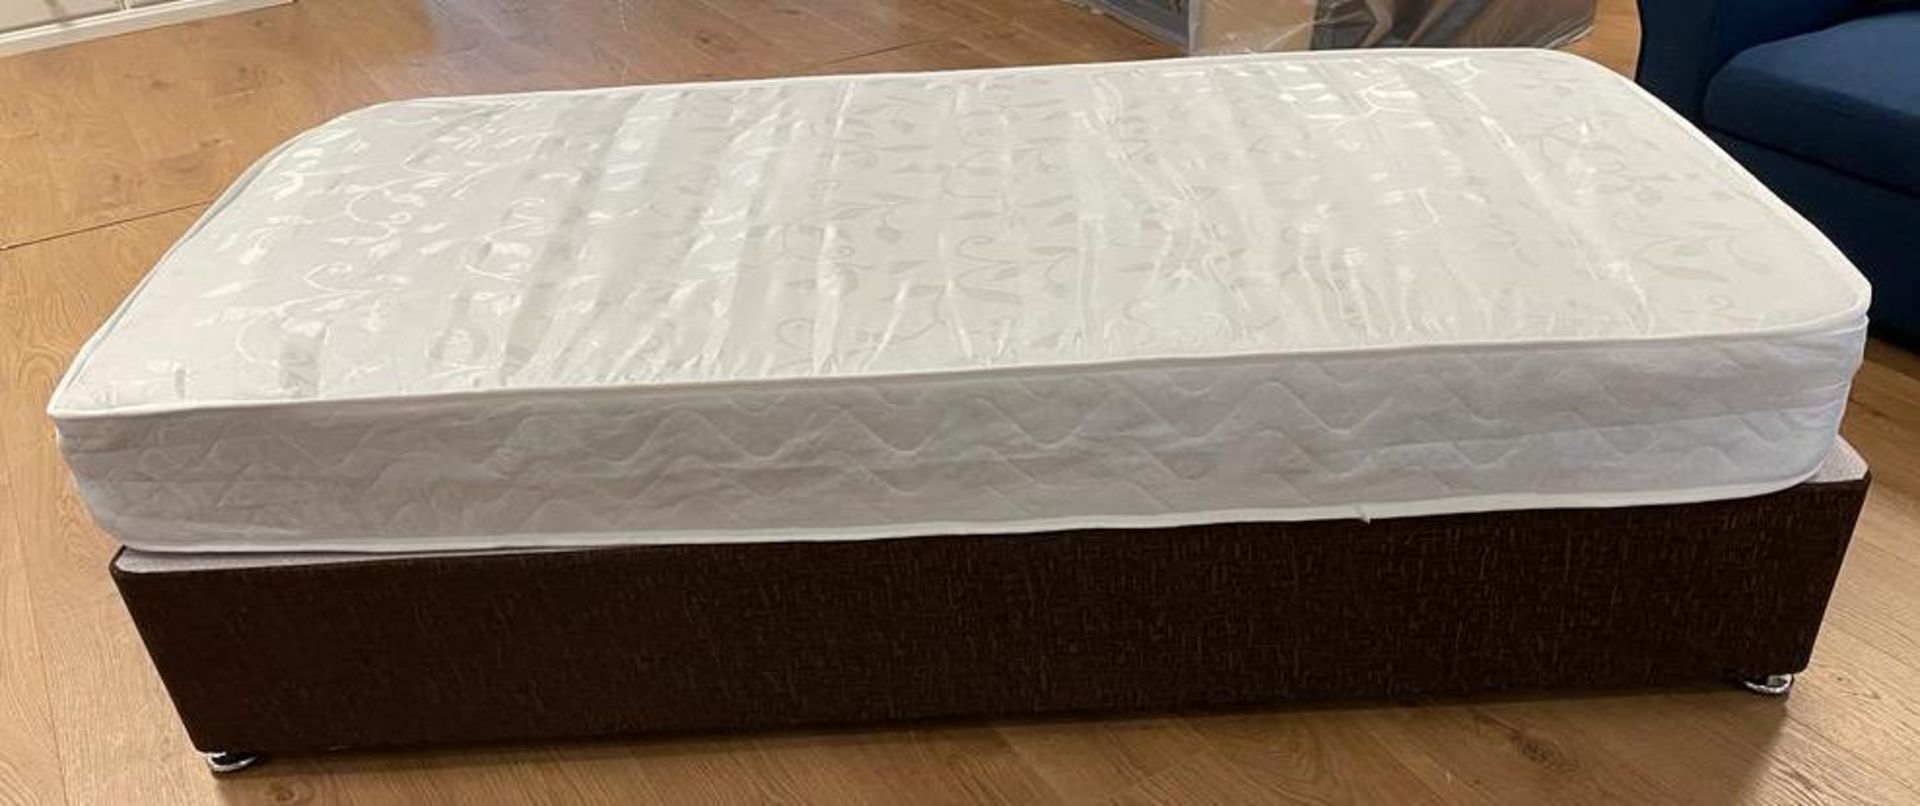 Brand New Trade Lot 5 X 4'6ft bed base in a light brown chenille with 800 pocket sprung Mattress.